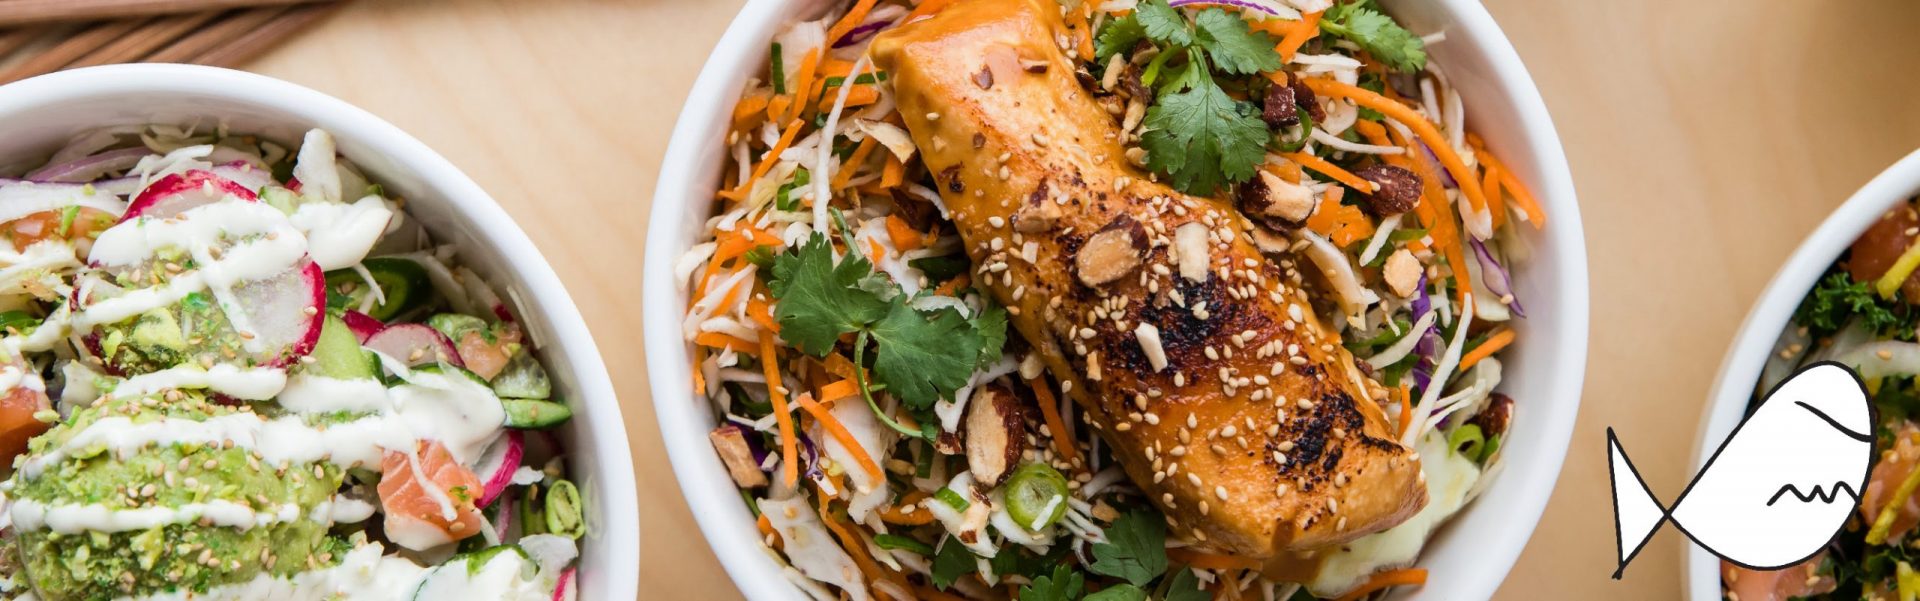 DEAL: Fishbowl - 20% off Orders with $10 Minimum Spend via Deliveroo (until 7 July 2022) 8